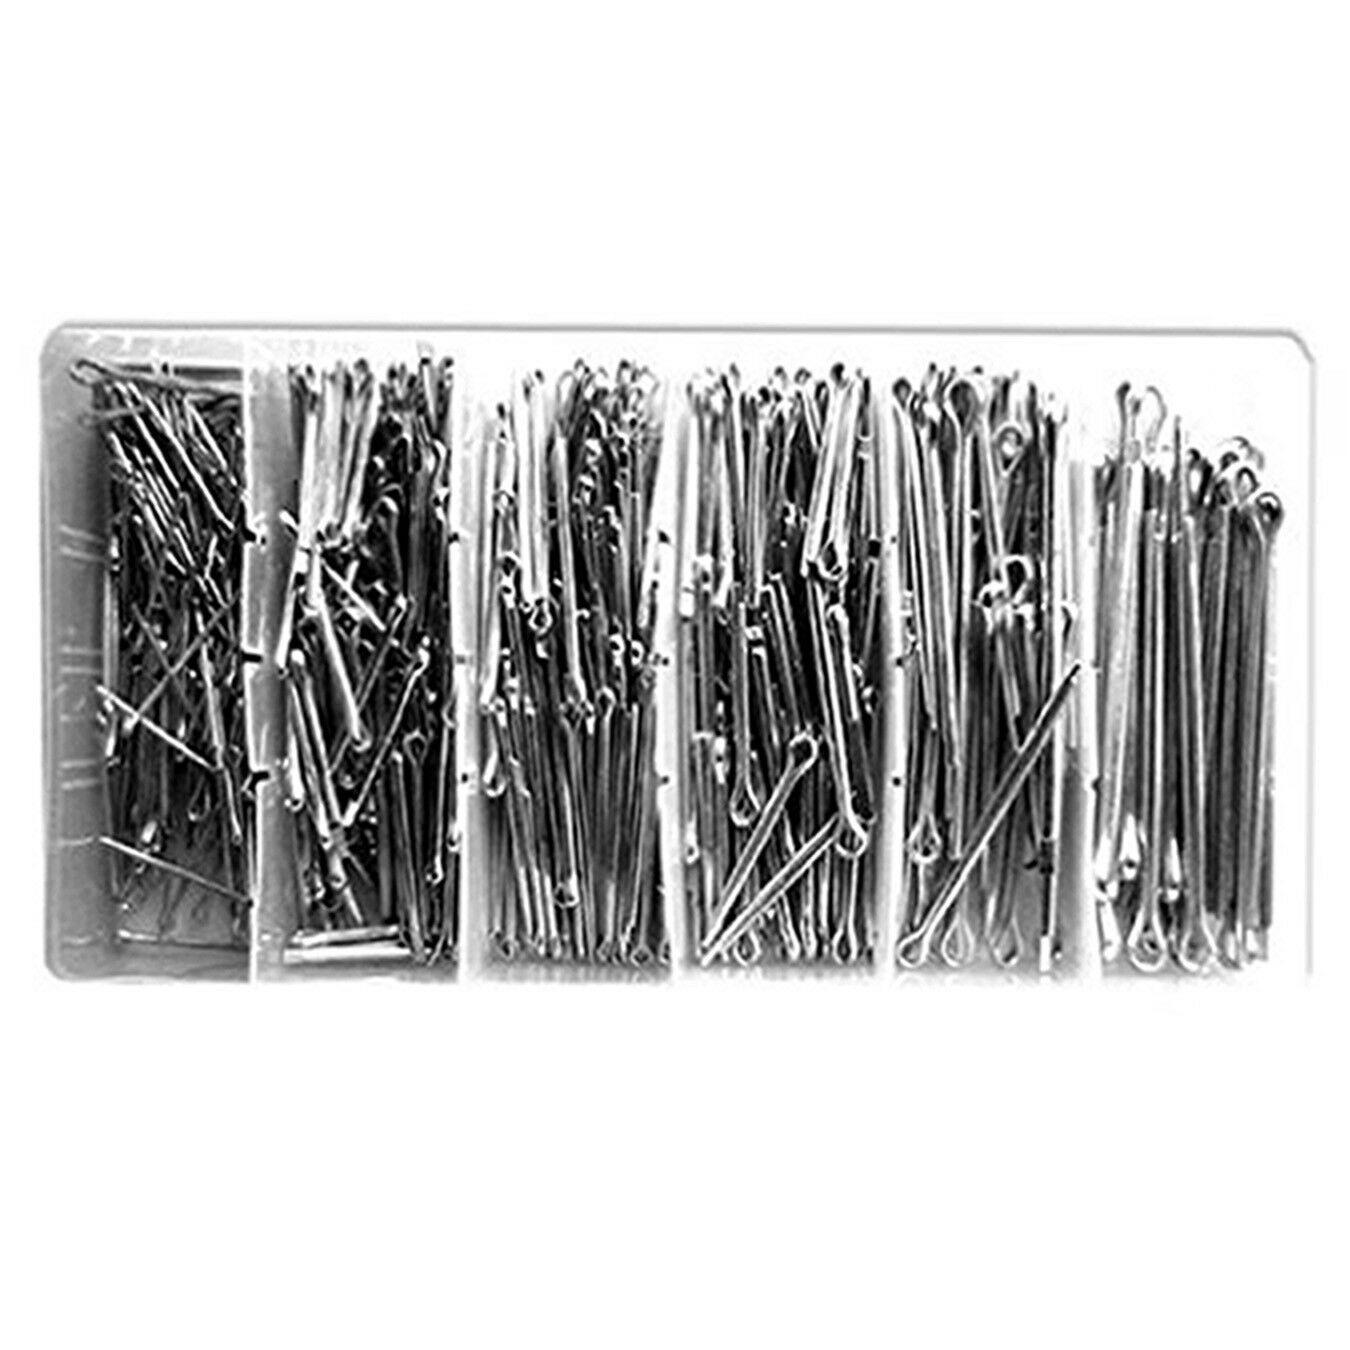 555 Pcs Cotter Pin Assortment With Case Container